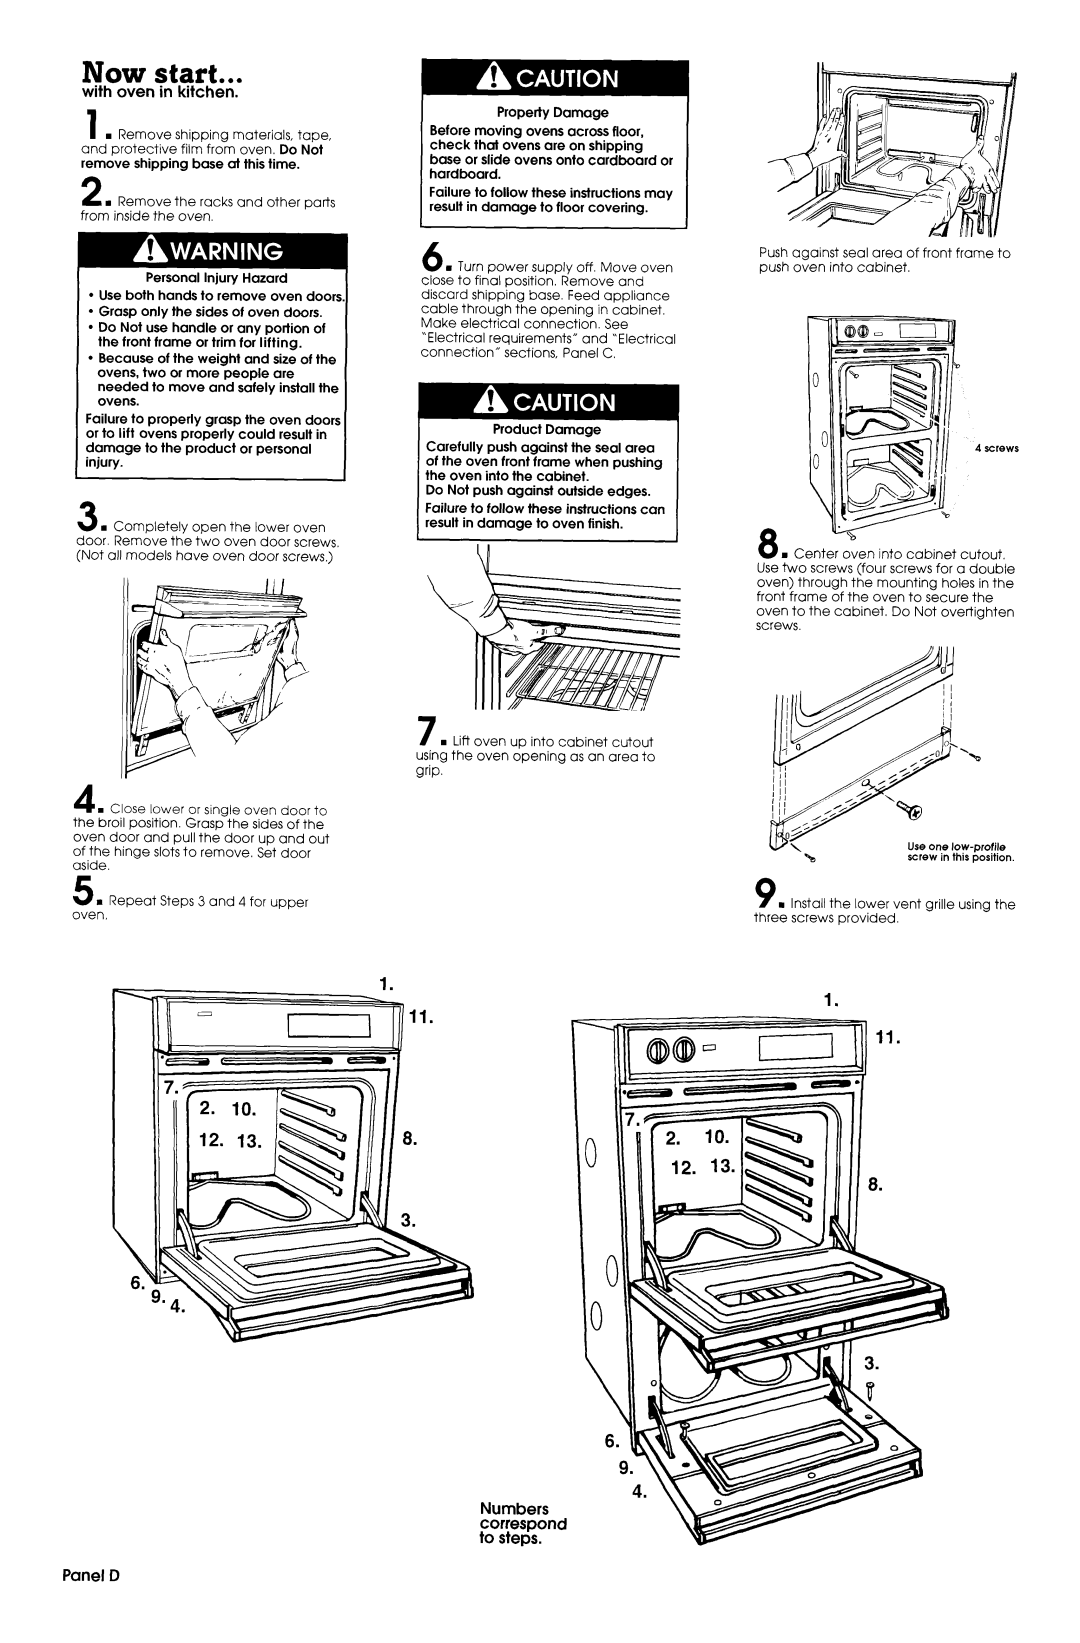 Maytag 3183636 installation instructions Now start, with oven in kitchen, Panel D, Numbers correspond to steps 